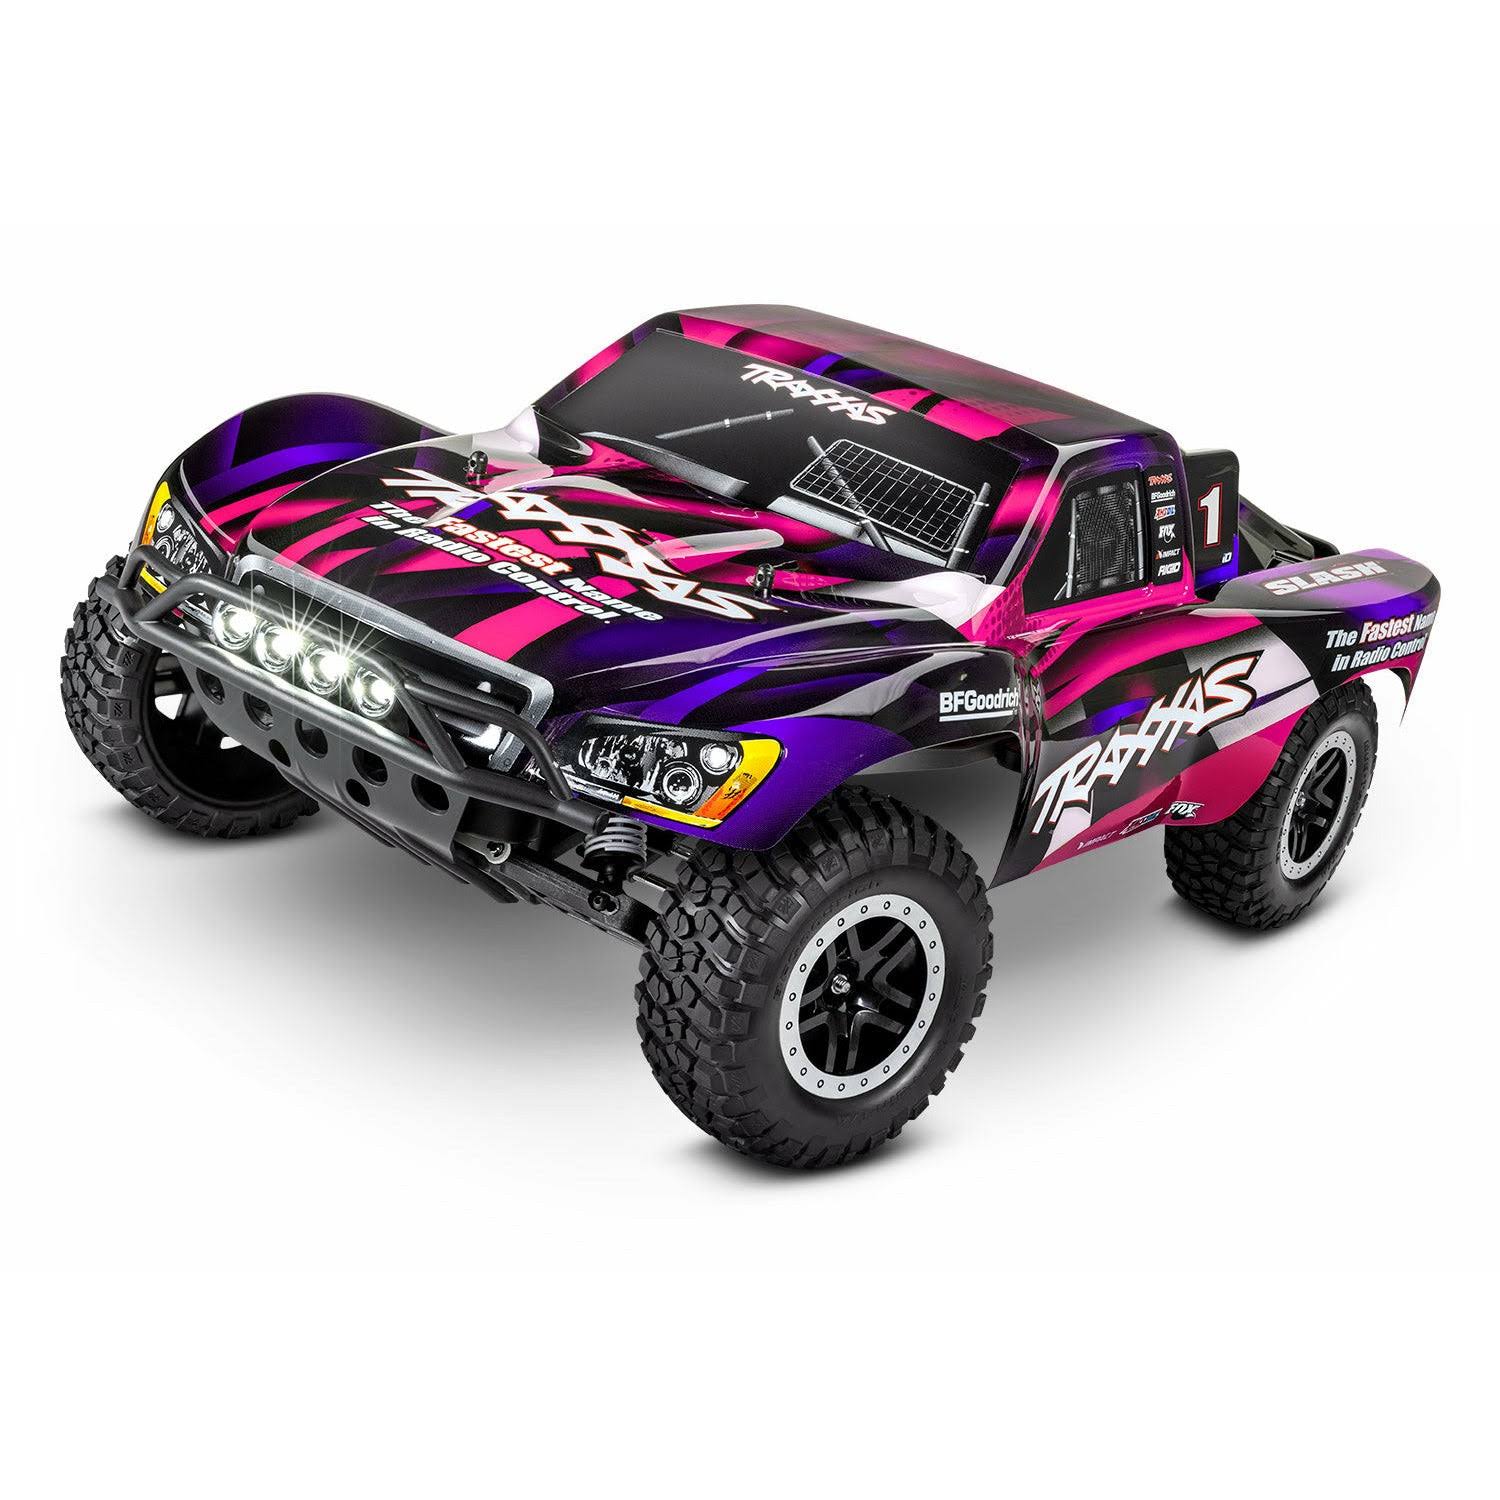 Traxxas Slash RTR Short Course Truck with LED, 2WD Pink